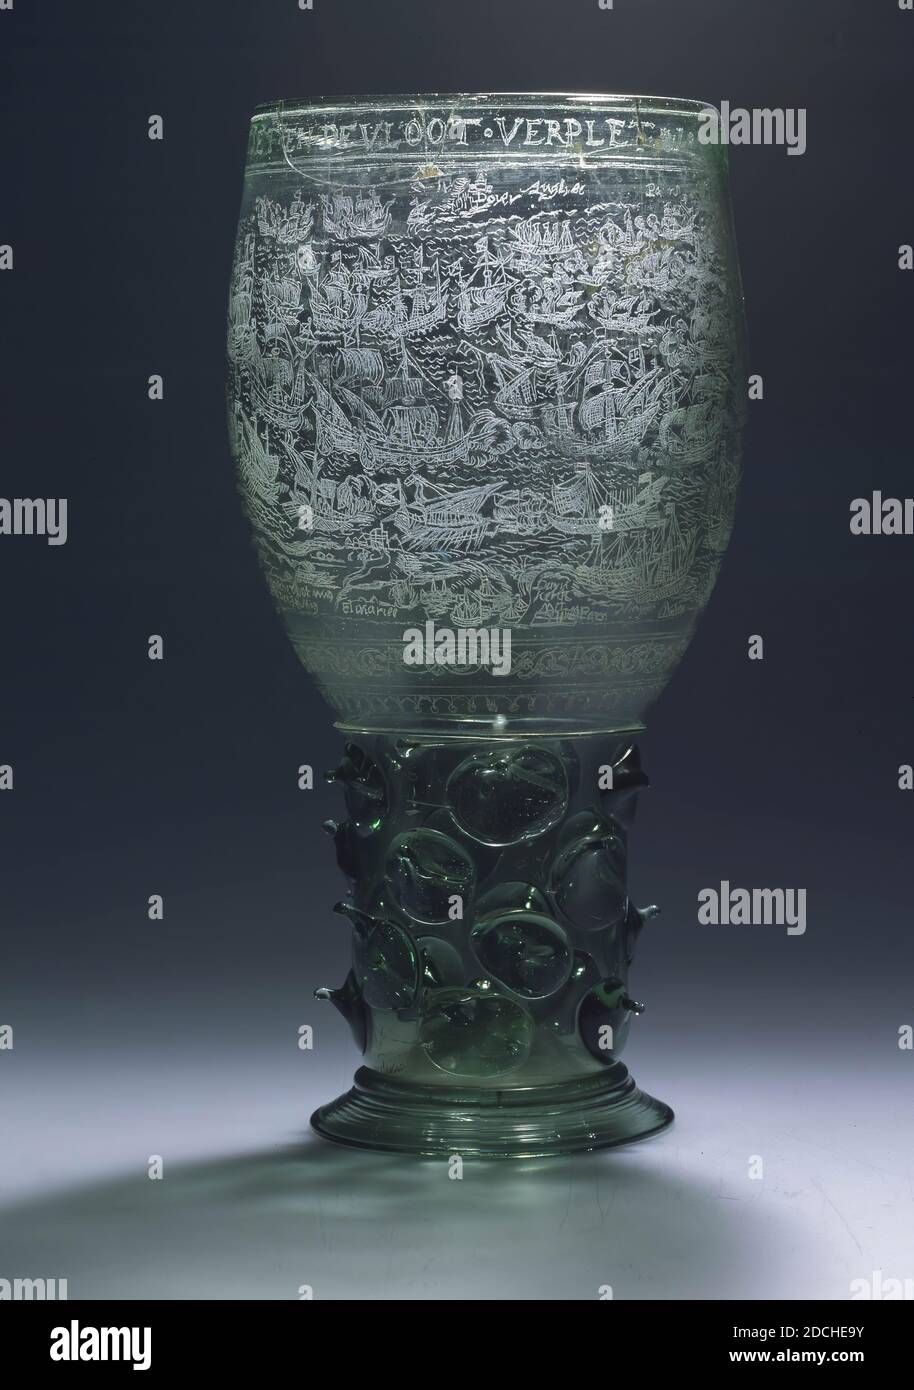 roemer, 1626, General: 23.3 x 10.4cm (233 x 104mm), Base diameter: 8.5cm / Diameter chalice: 10.4cm, Roemer of green glass, engraved with the map of Leiden and environs during the relief and with the battle of Dunkirk. On the top edge is engraved Door. T. vierigh. bitten. Leyde was dismayed. AND . DE. FLEET. CRUSHED. 1626. There are studs on the narrow stem of the roemer and the foot extends wide downwards, floor plan Stock Photo